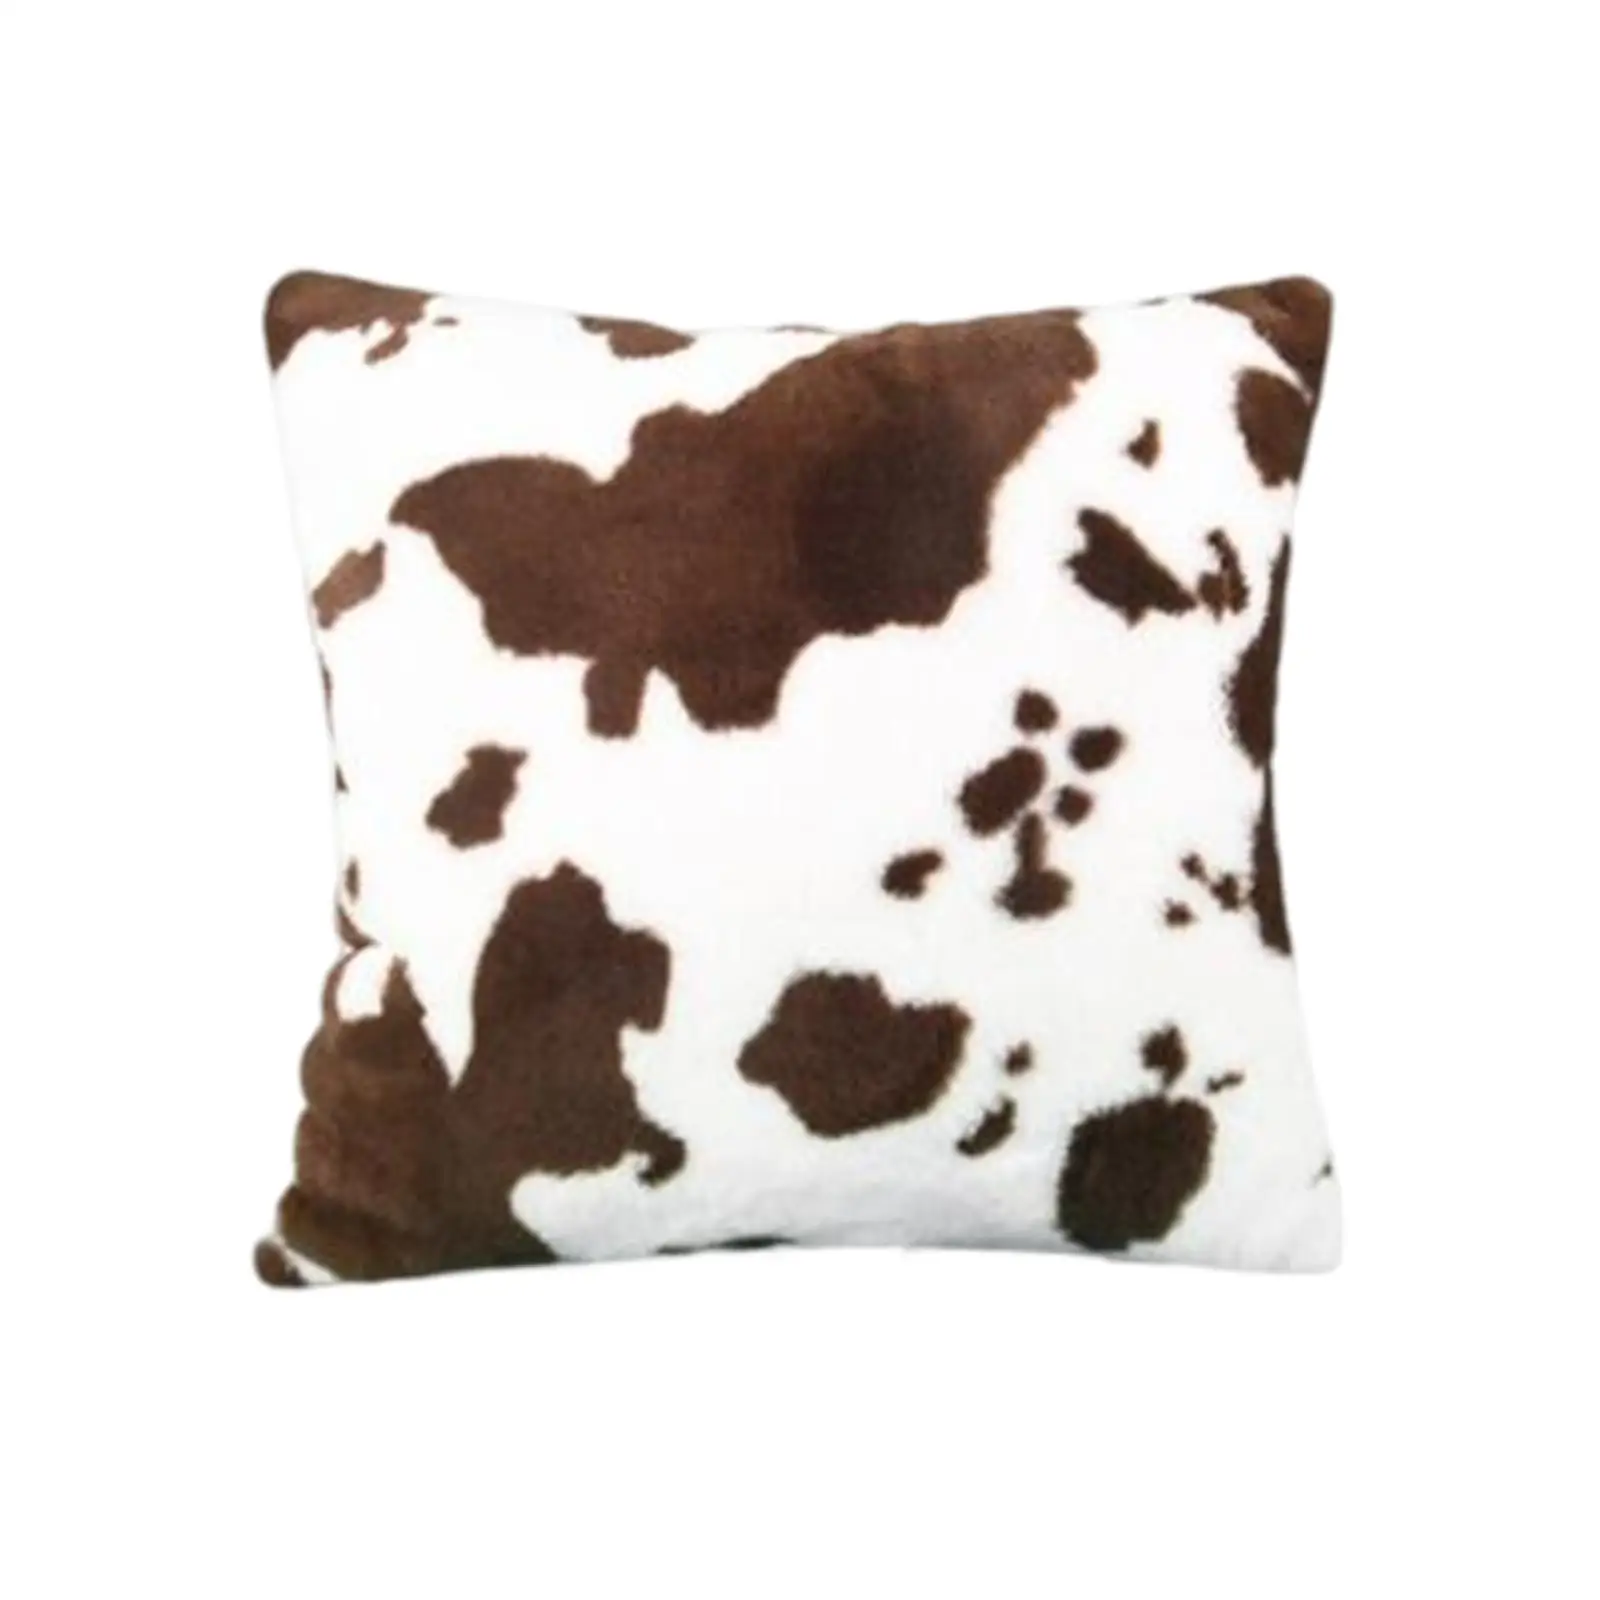 Cow Pattern Printed 18x18 Inches Pillowcase Cushion Cover for Sofa Couch Short Plush Material Square Shop Decoration Soft